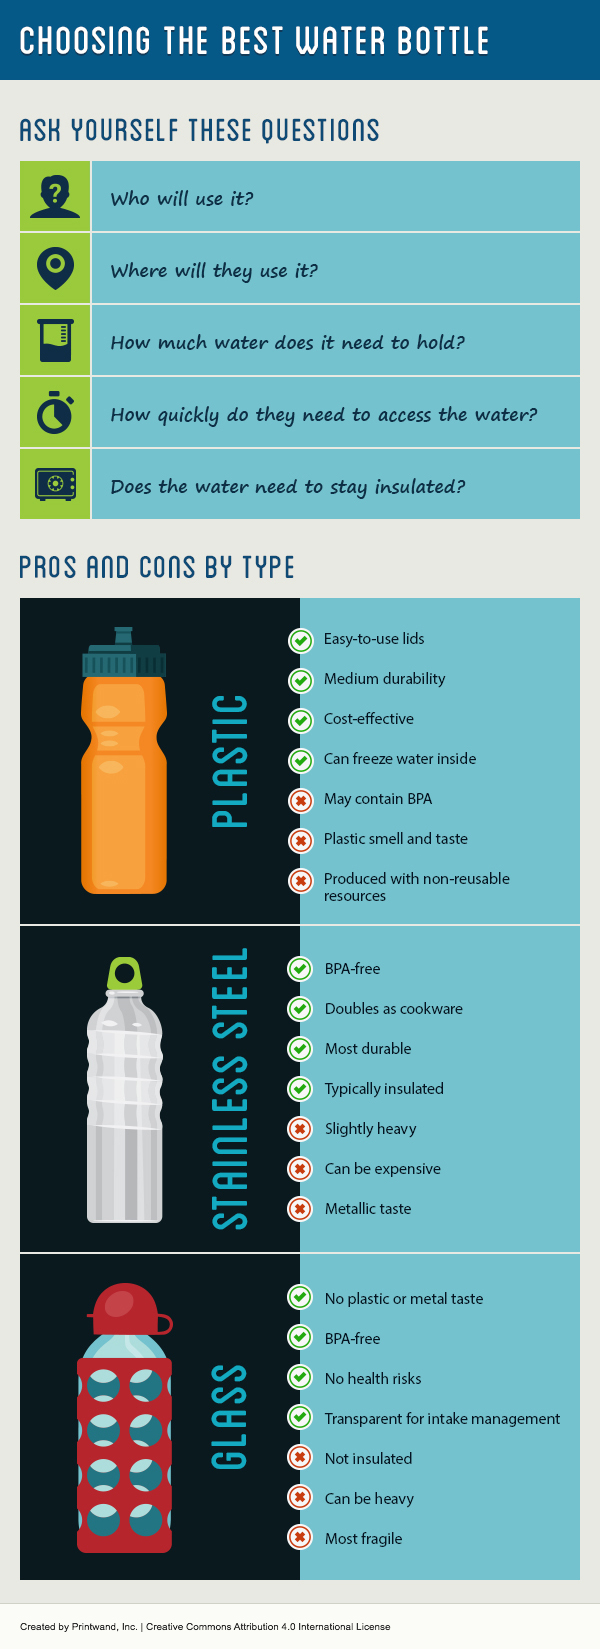 Compare the Best Reusable Water Bottles & Their Benefits